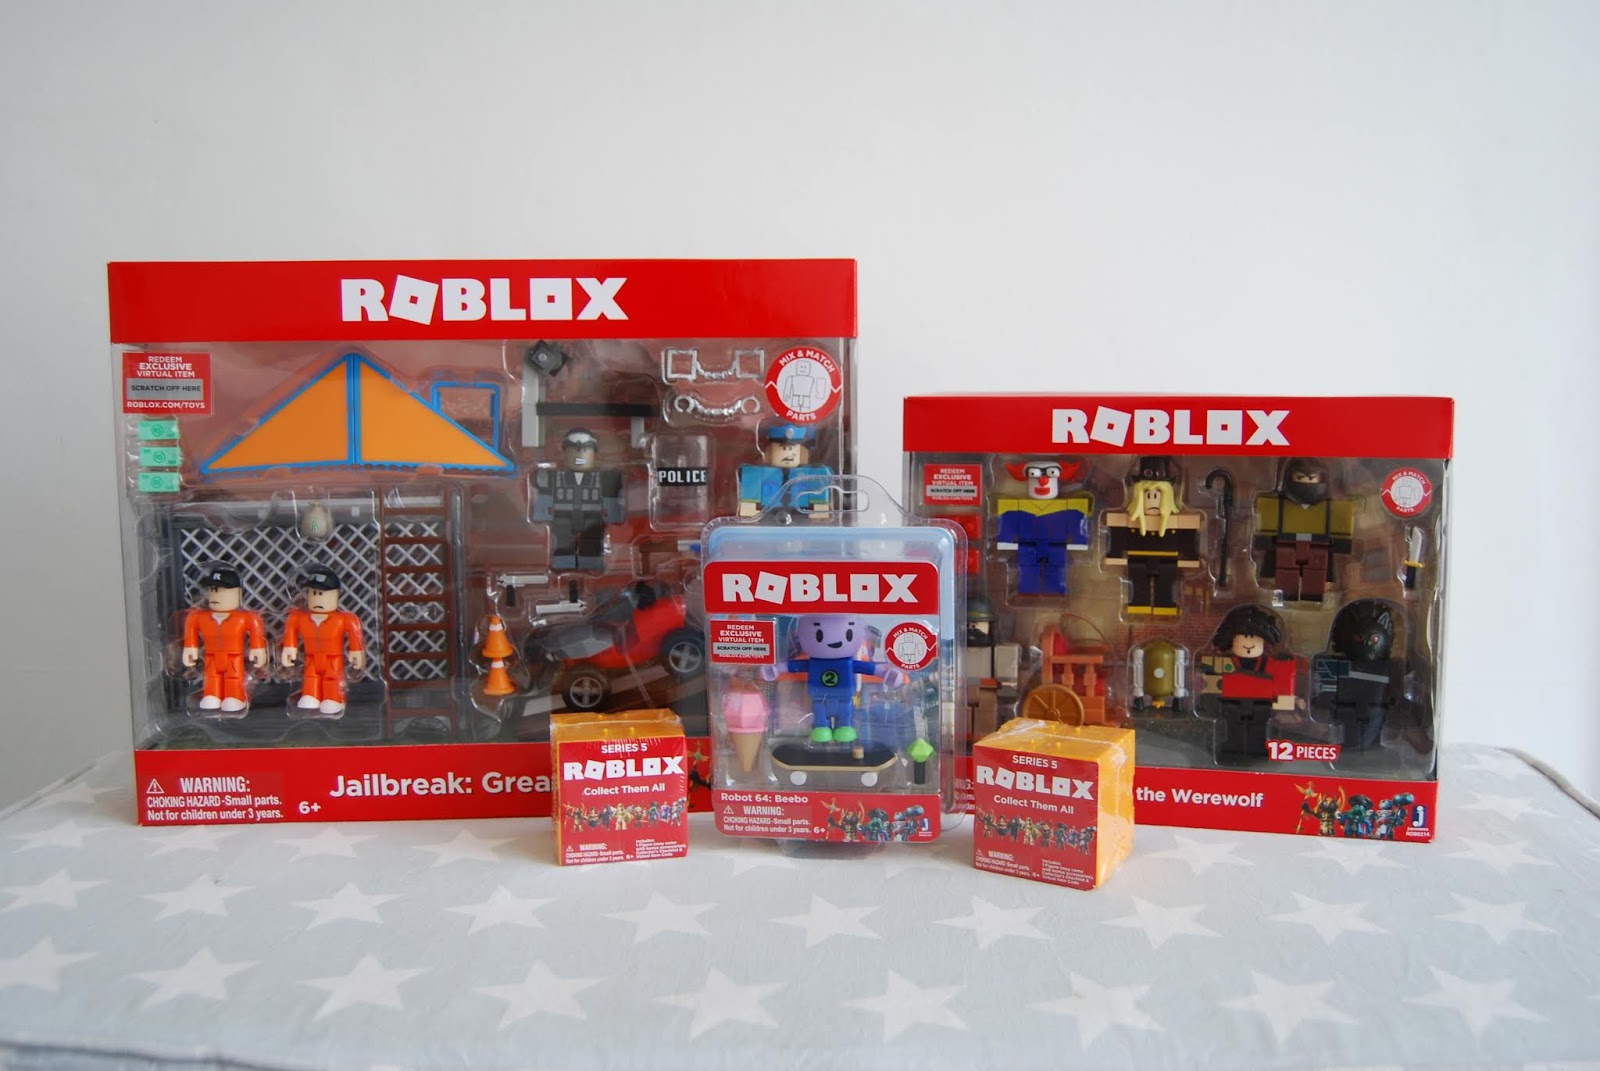 Roblox Toys Jailbreak Great Escape Roblox Free T Shirts - action figures tv movie video games roblox apocalypse